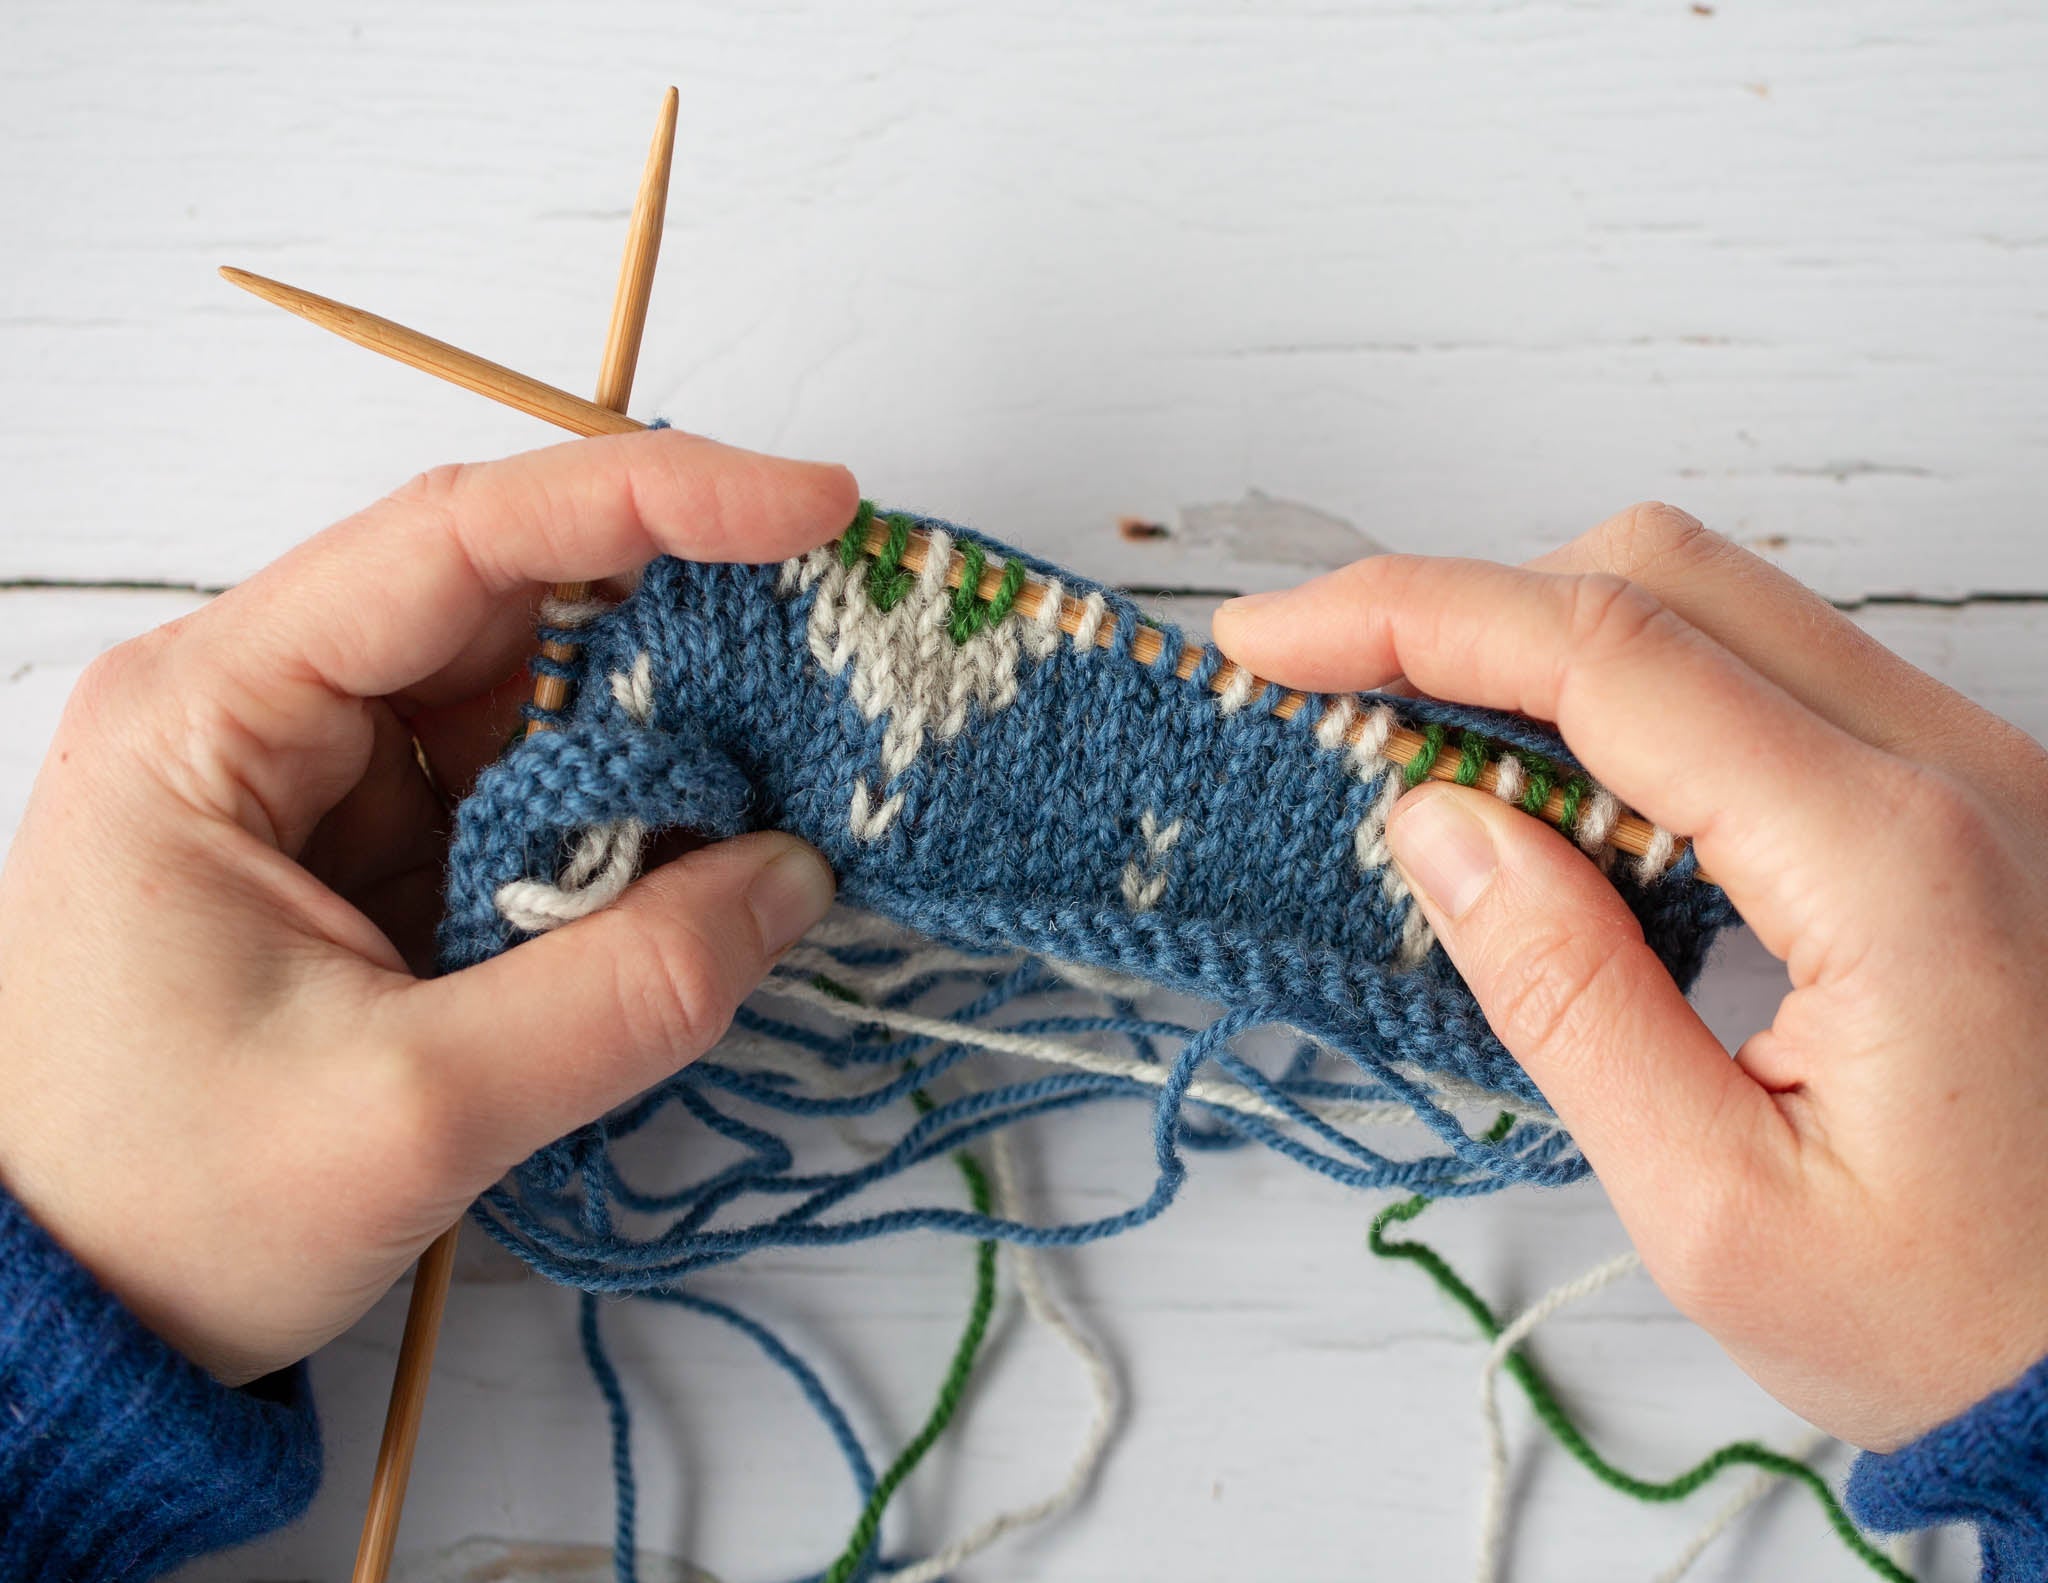 Two white hands hold a piece of blue and white knitting over a flat surface. The fabric is still on wooden knitting needles and shows a colourwork pattern.